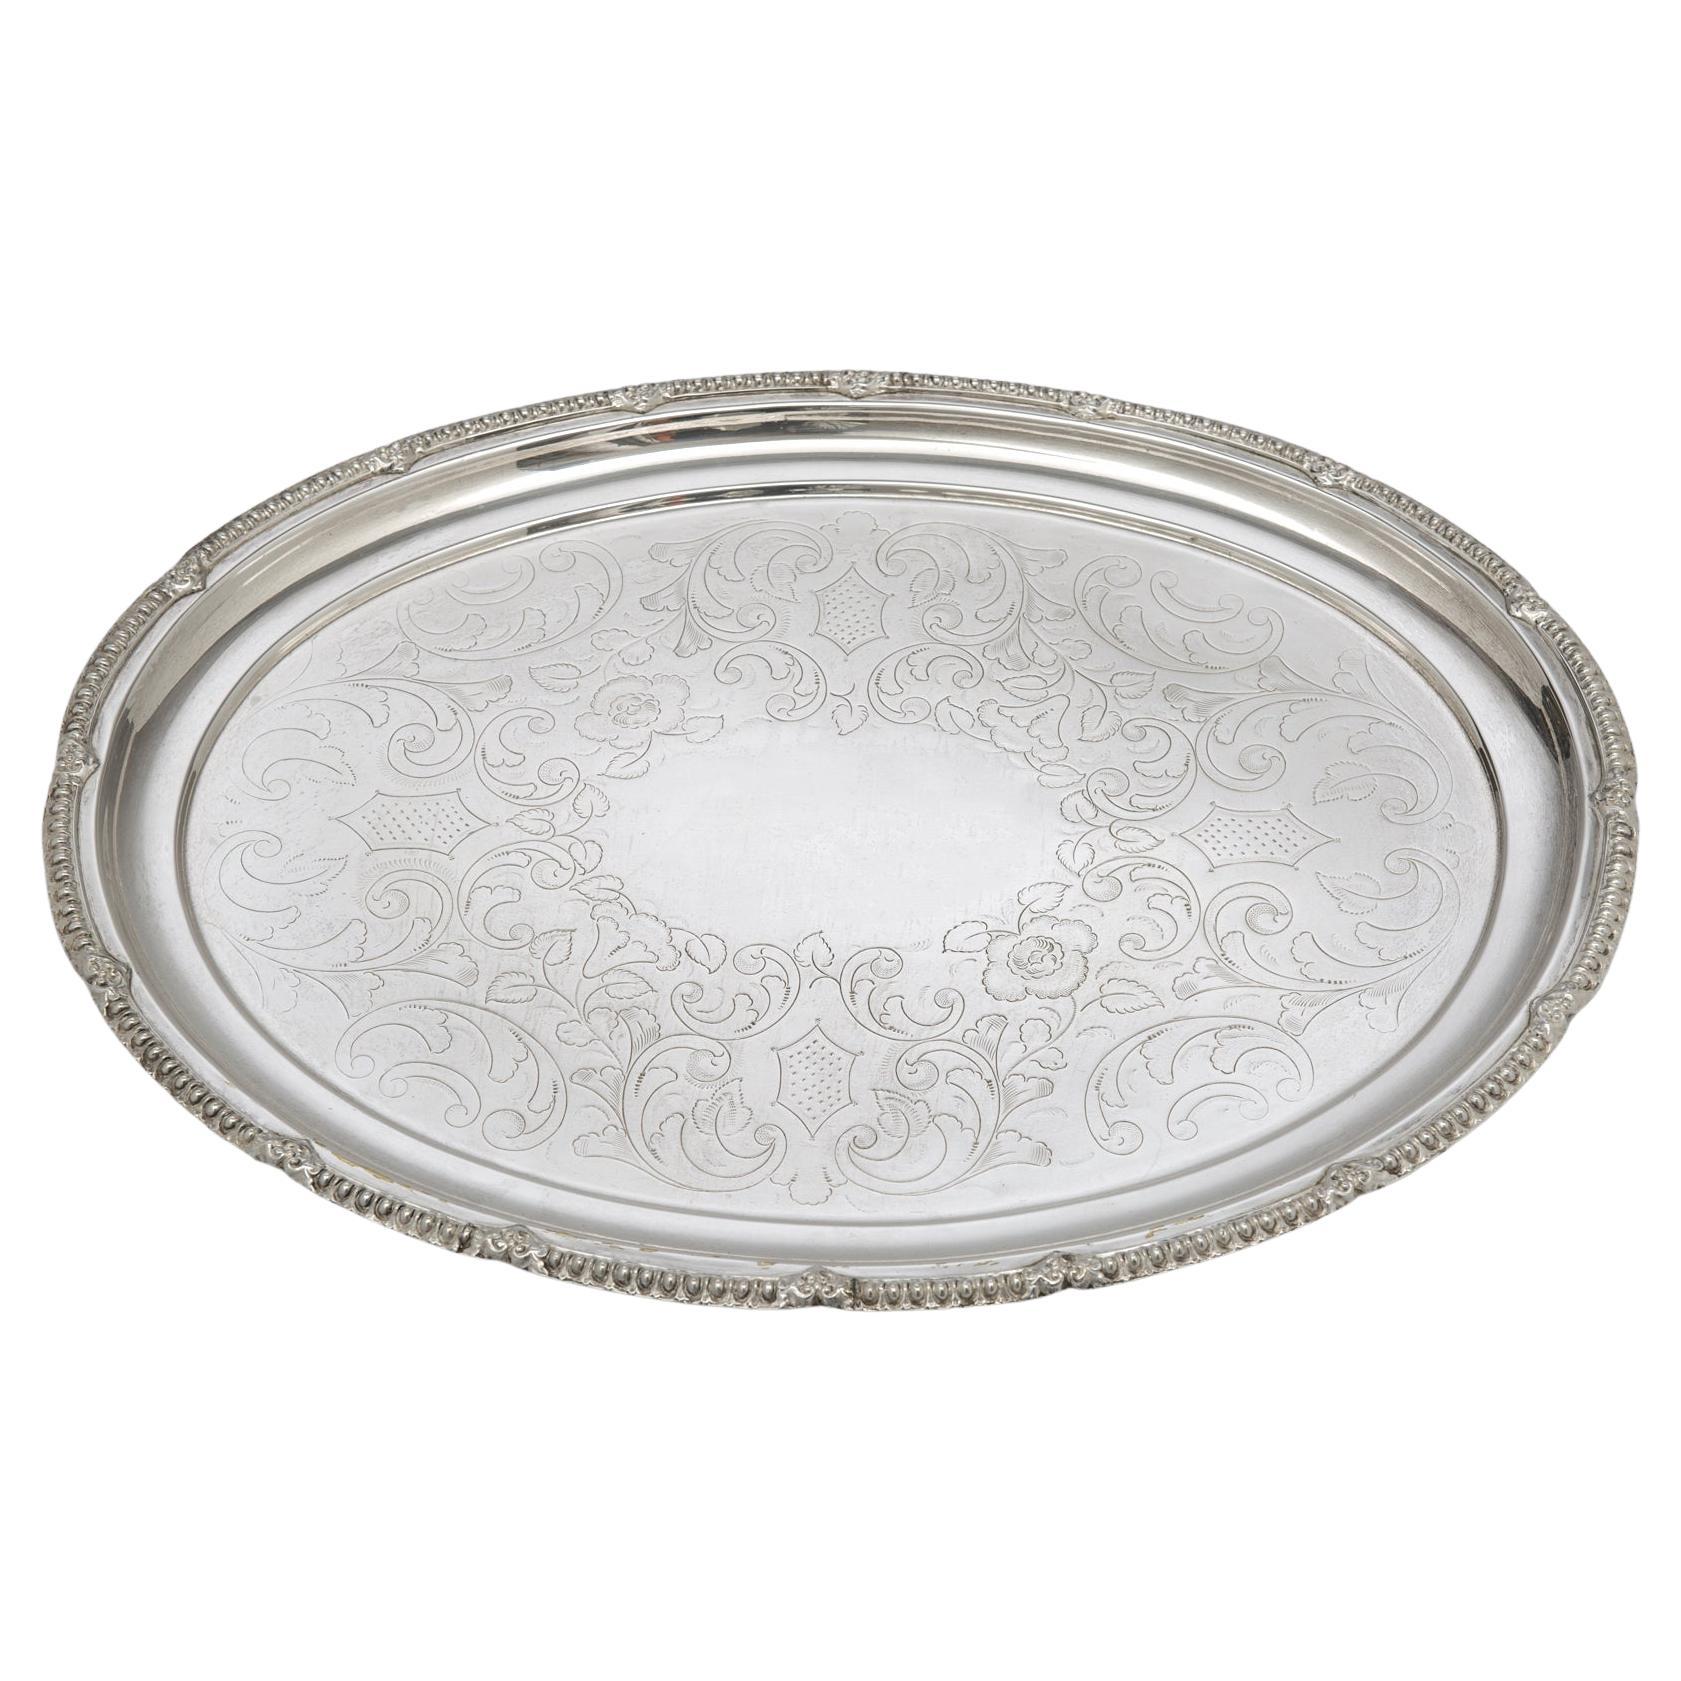 Oval Engraved Silver Plated Belgian Tray